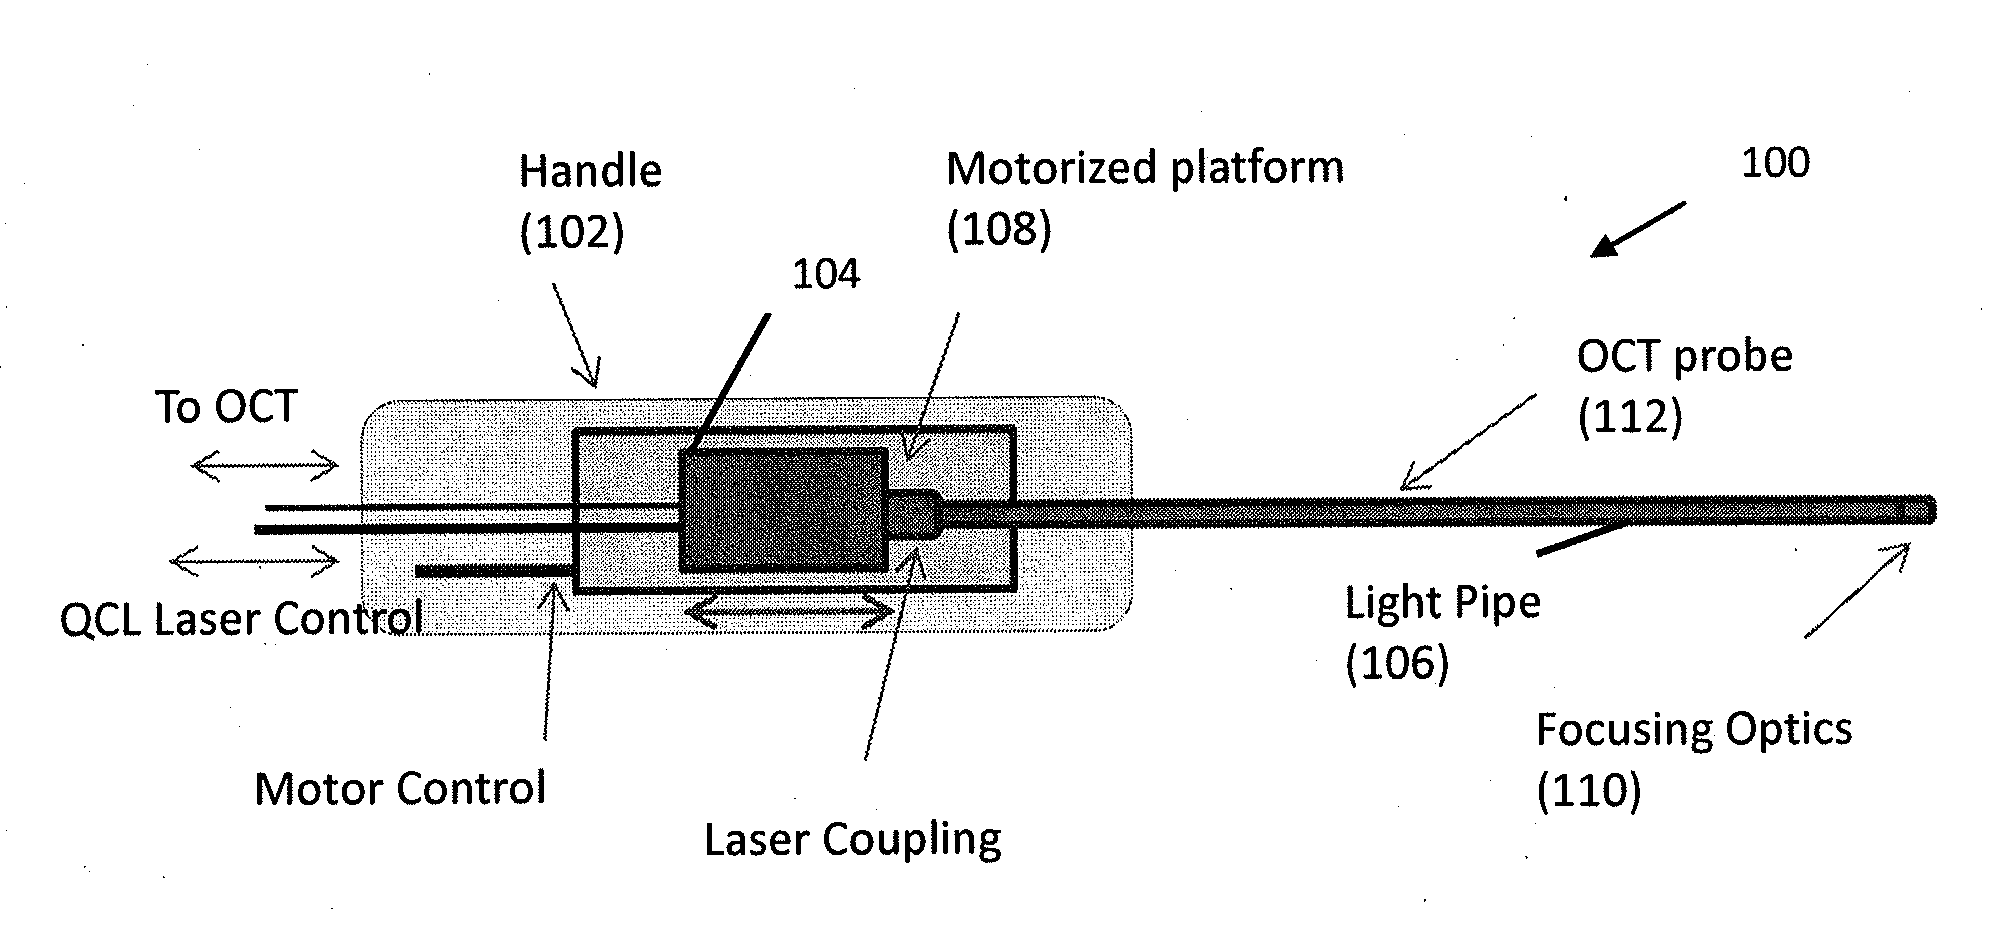 Mid-infrared laser therapy device and system